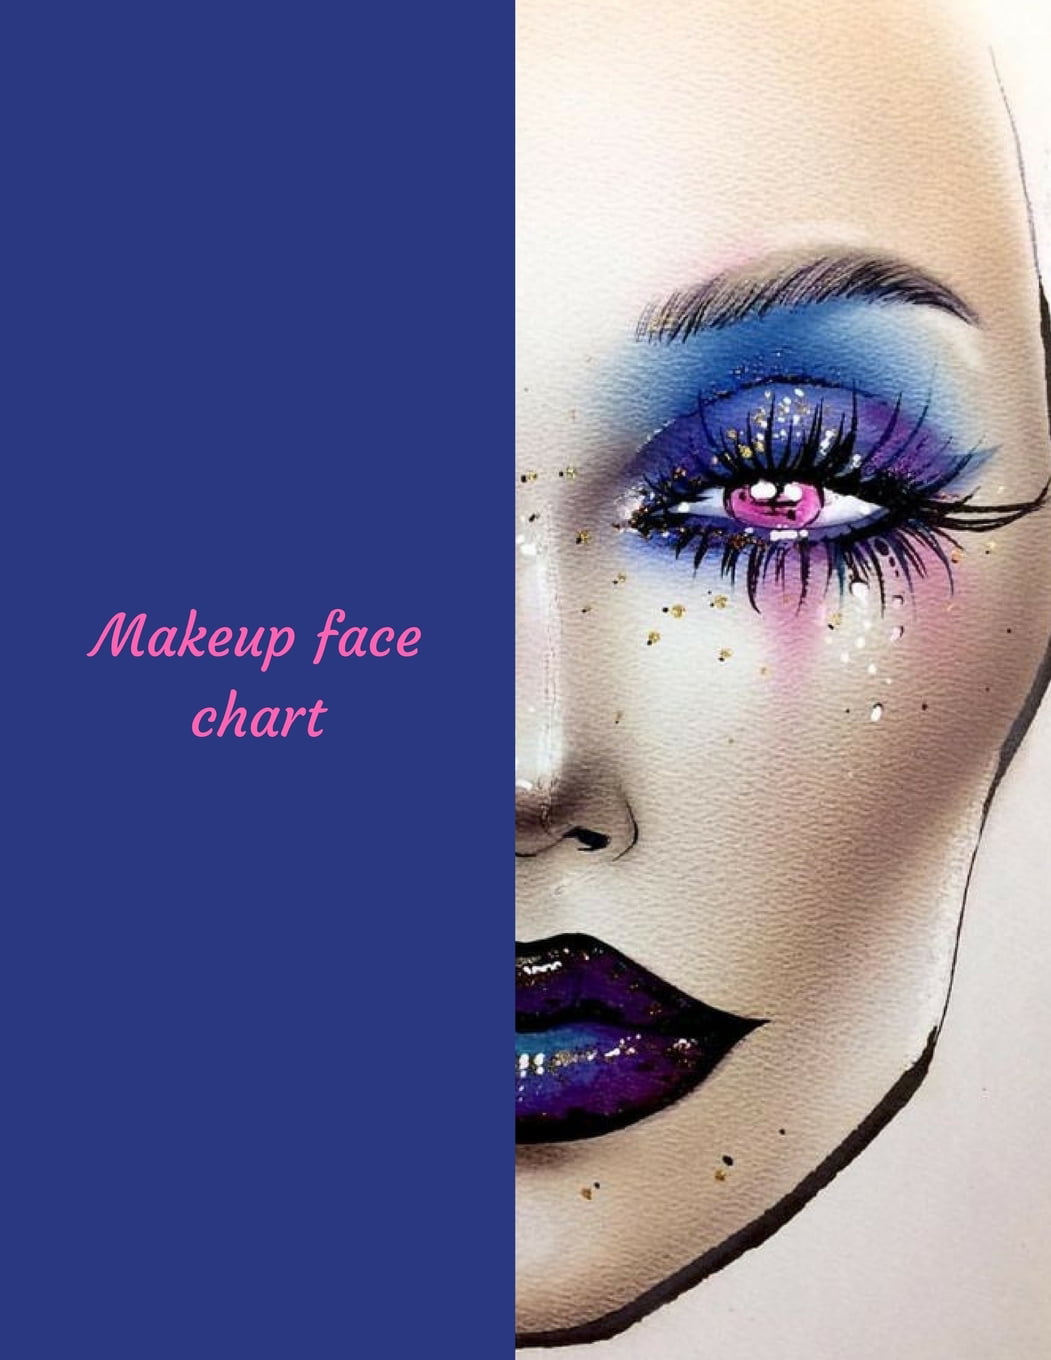 Stream +# Makeup Practice Face Charts, Blank Makeup Face Chart Worksheets  for Makeup Beginners and Exp by User 618780272